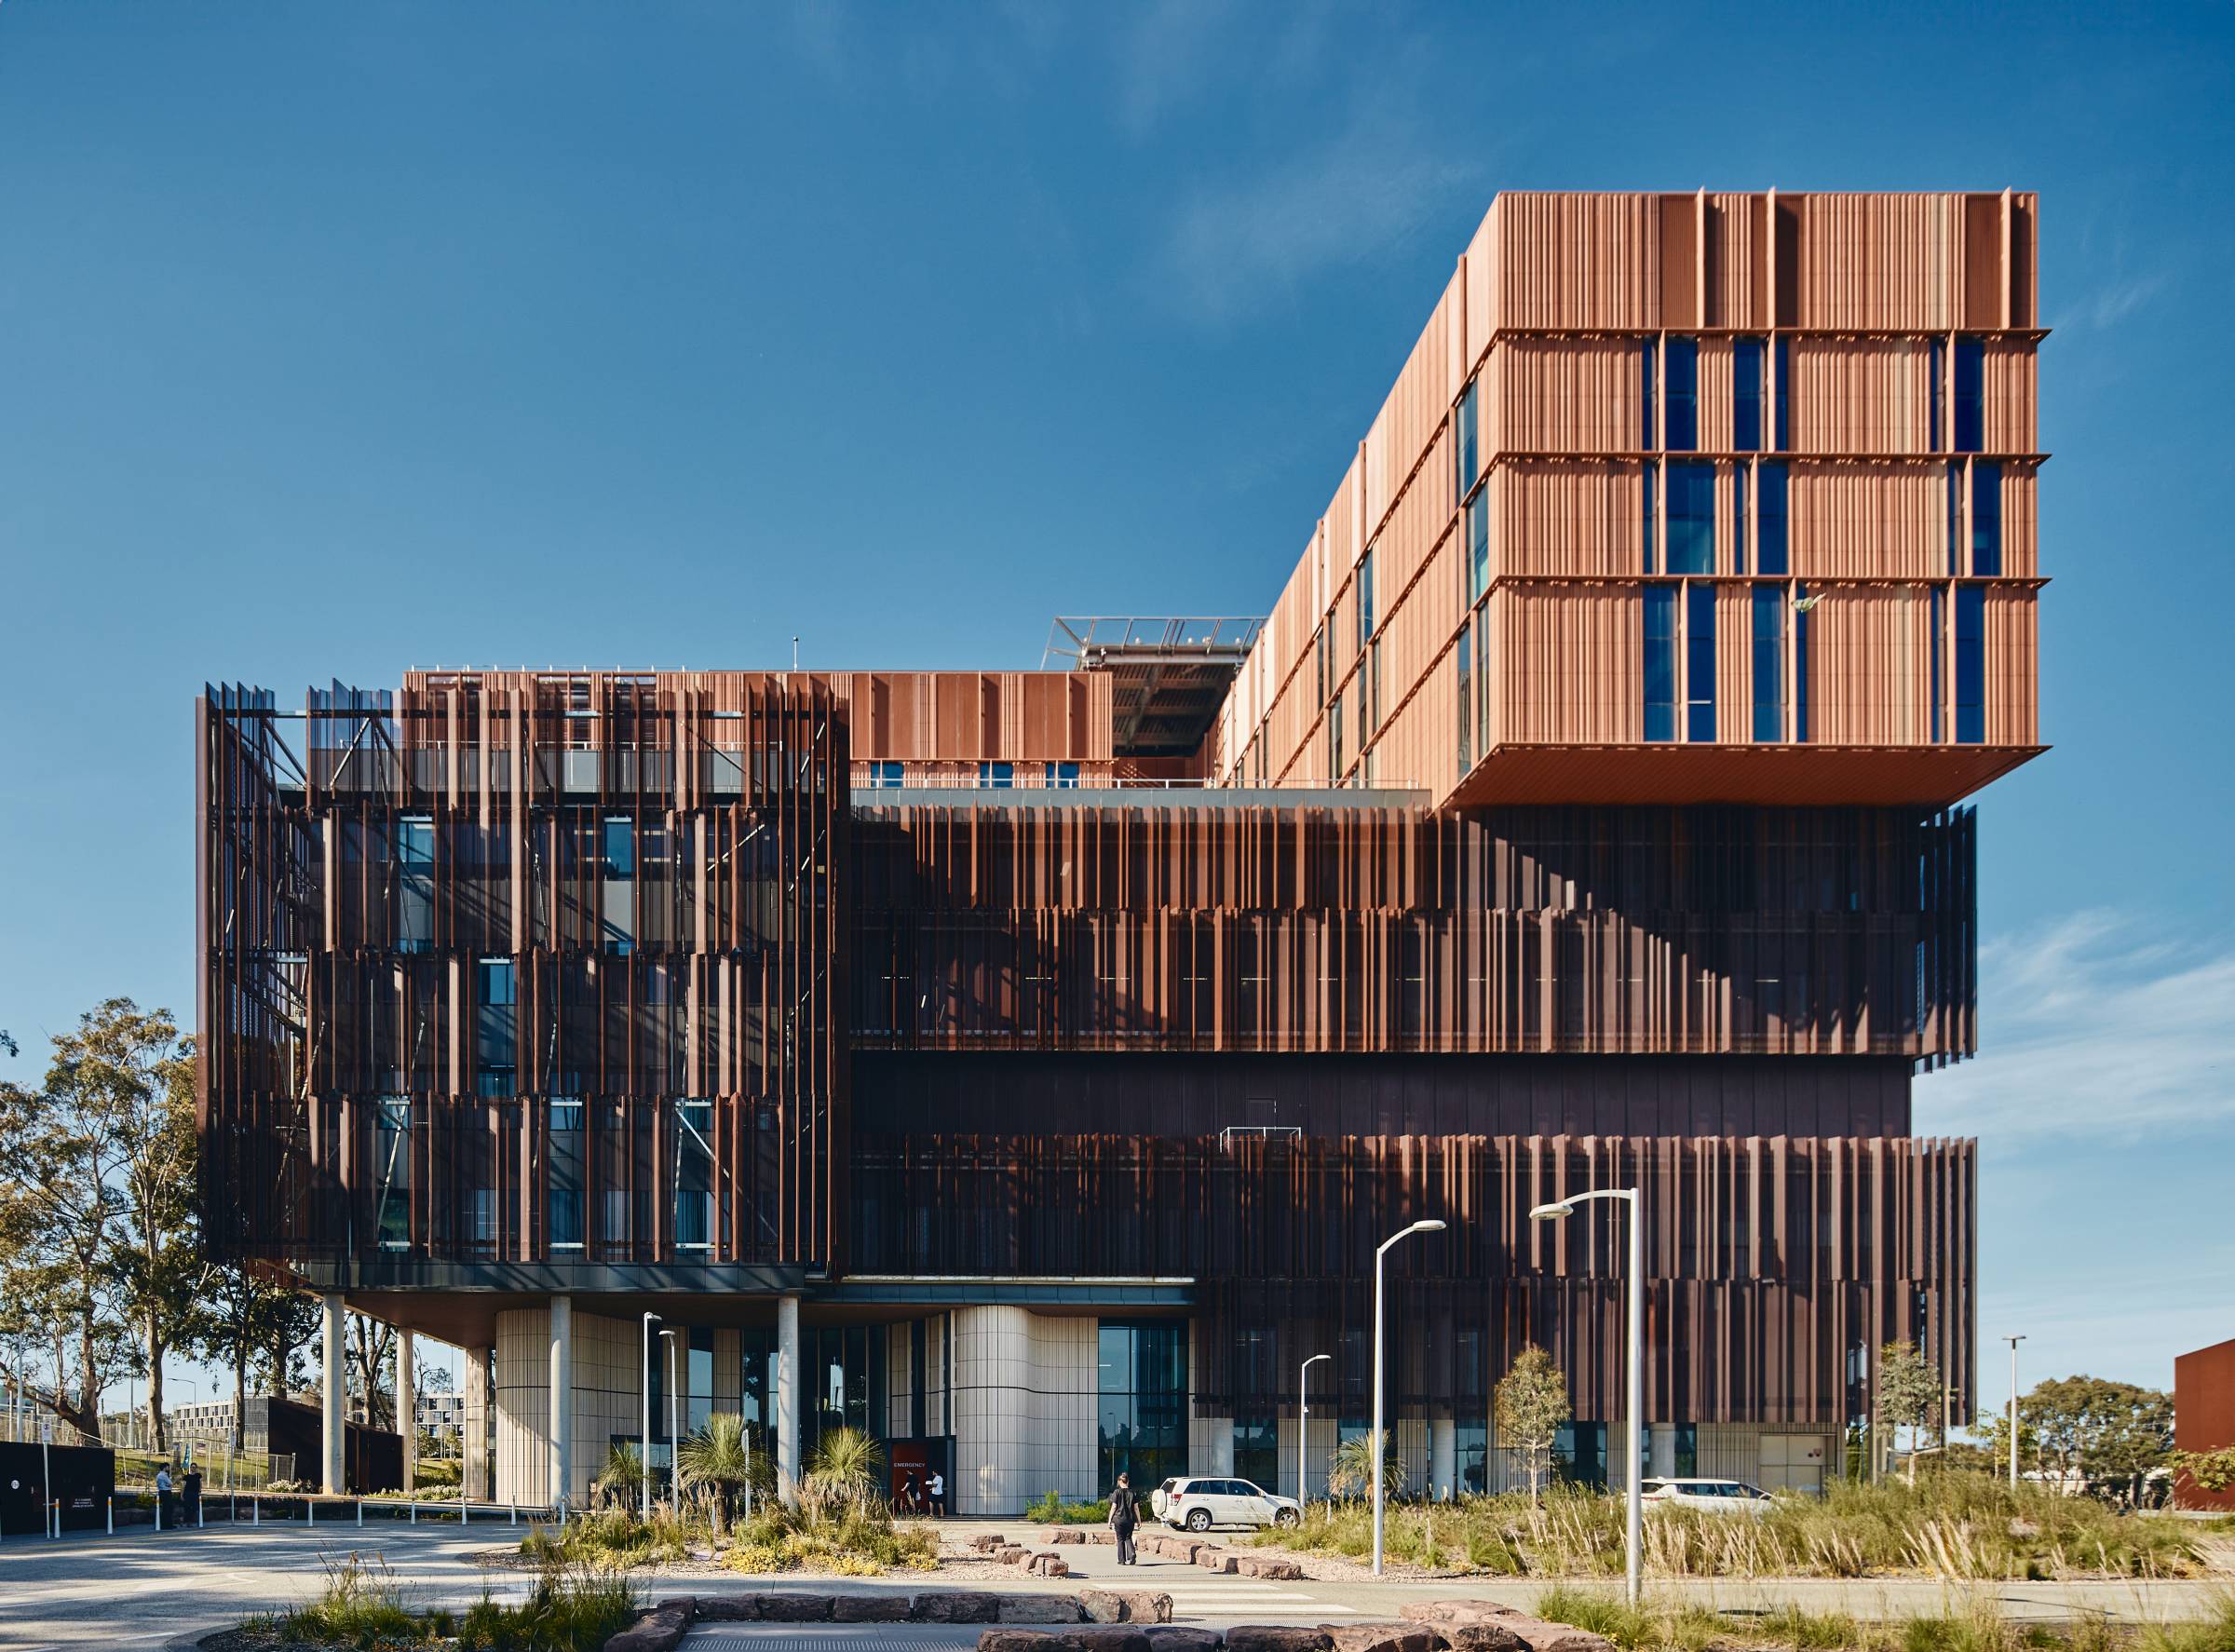 15+ years of sustainable architecture with the Green Building Council of Australia